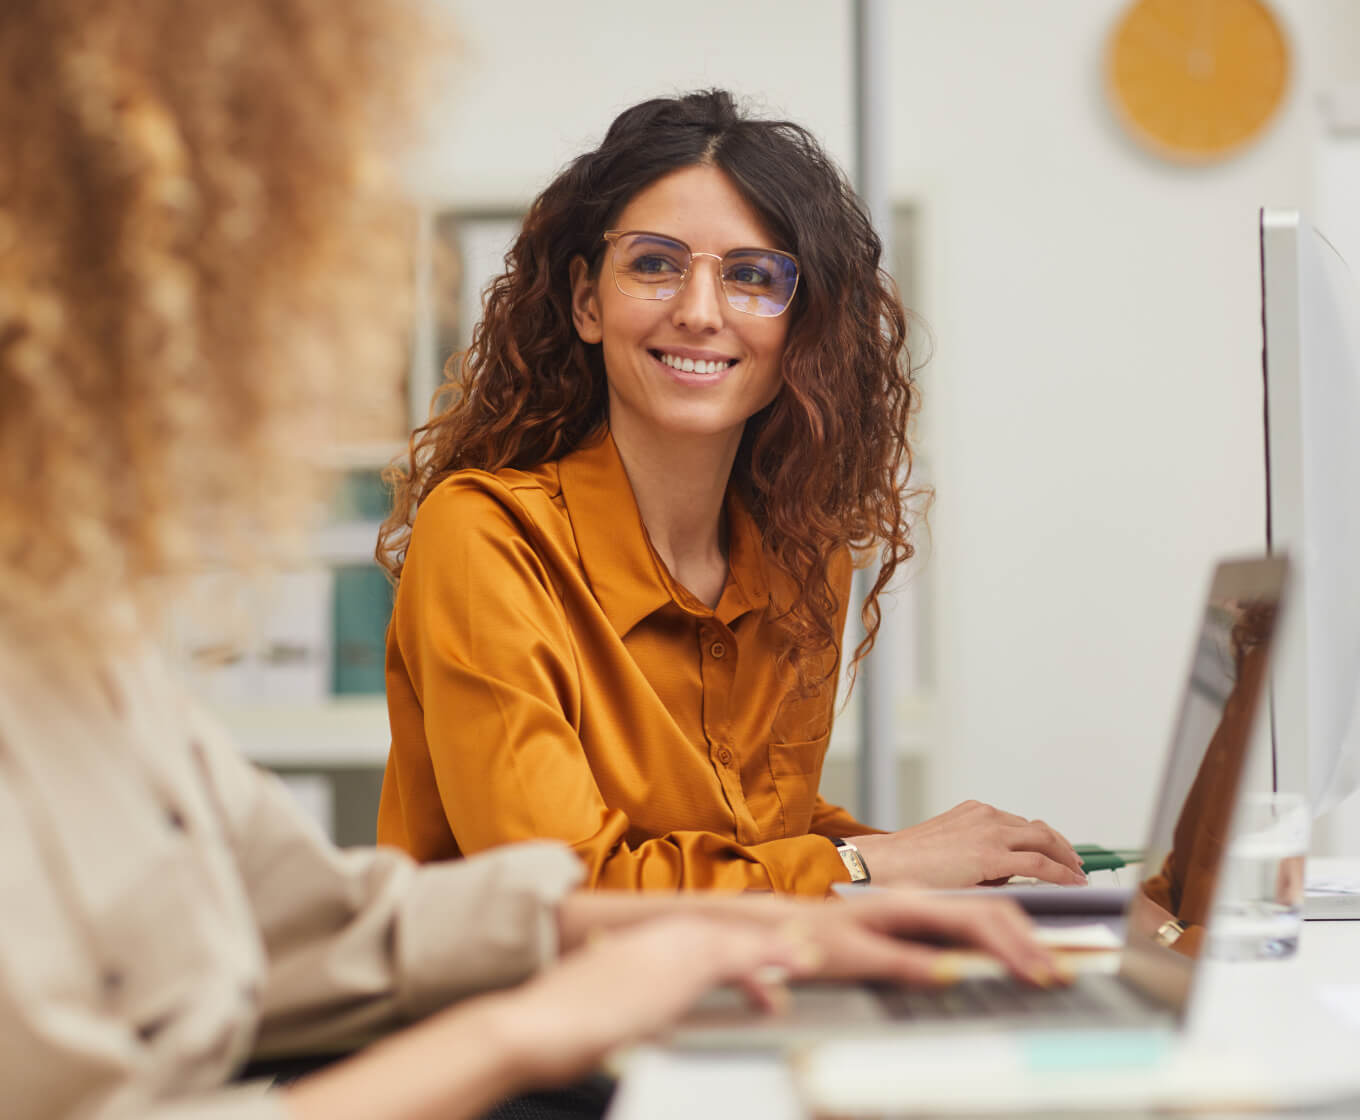 Two women sitting at a desk at work smiling at each other while on laptops